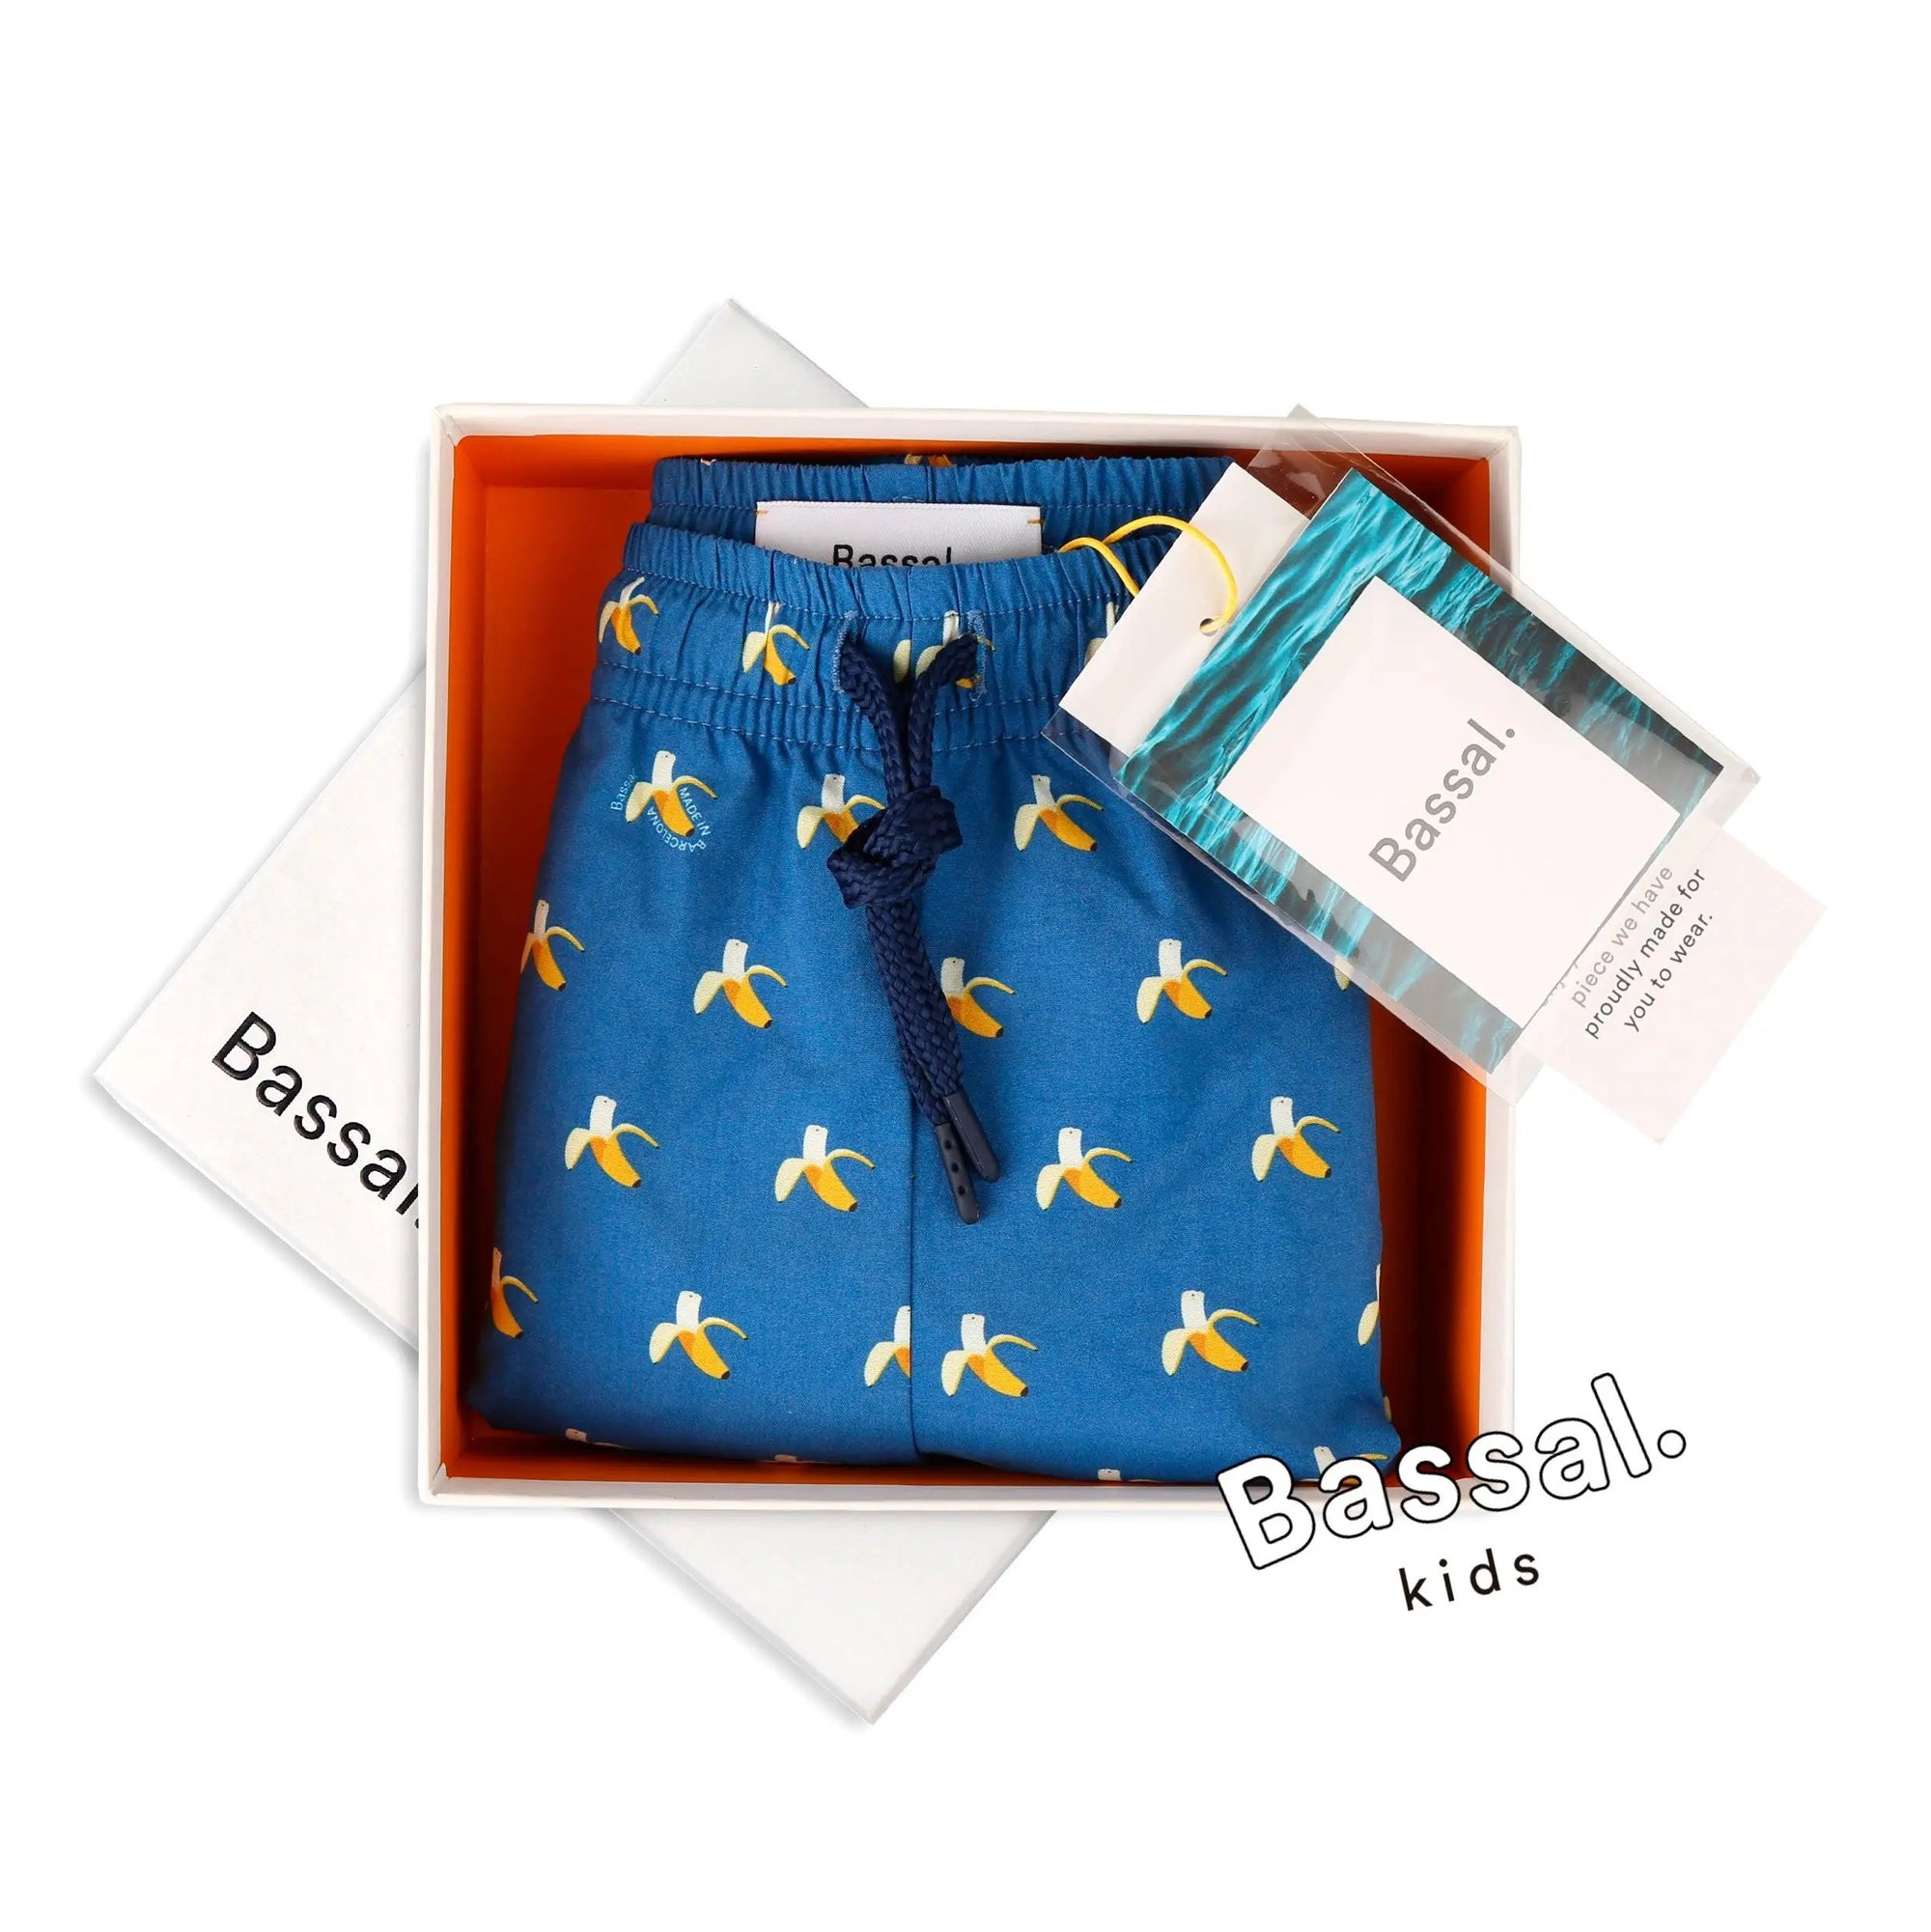 A pair of blue Bananas Kids Swimwear with a yellow and white banana print is neatly displayed in an orange-lined gift box. The swimwear has a navy blue drawstring and is tagged with a Bassal. kids label. The box lid features the brand name "Bassal" from bassalstore, your go-to store for fun fashion.
